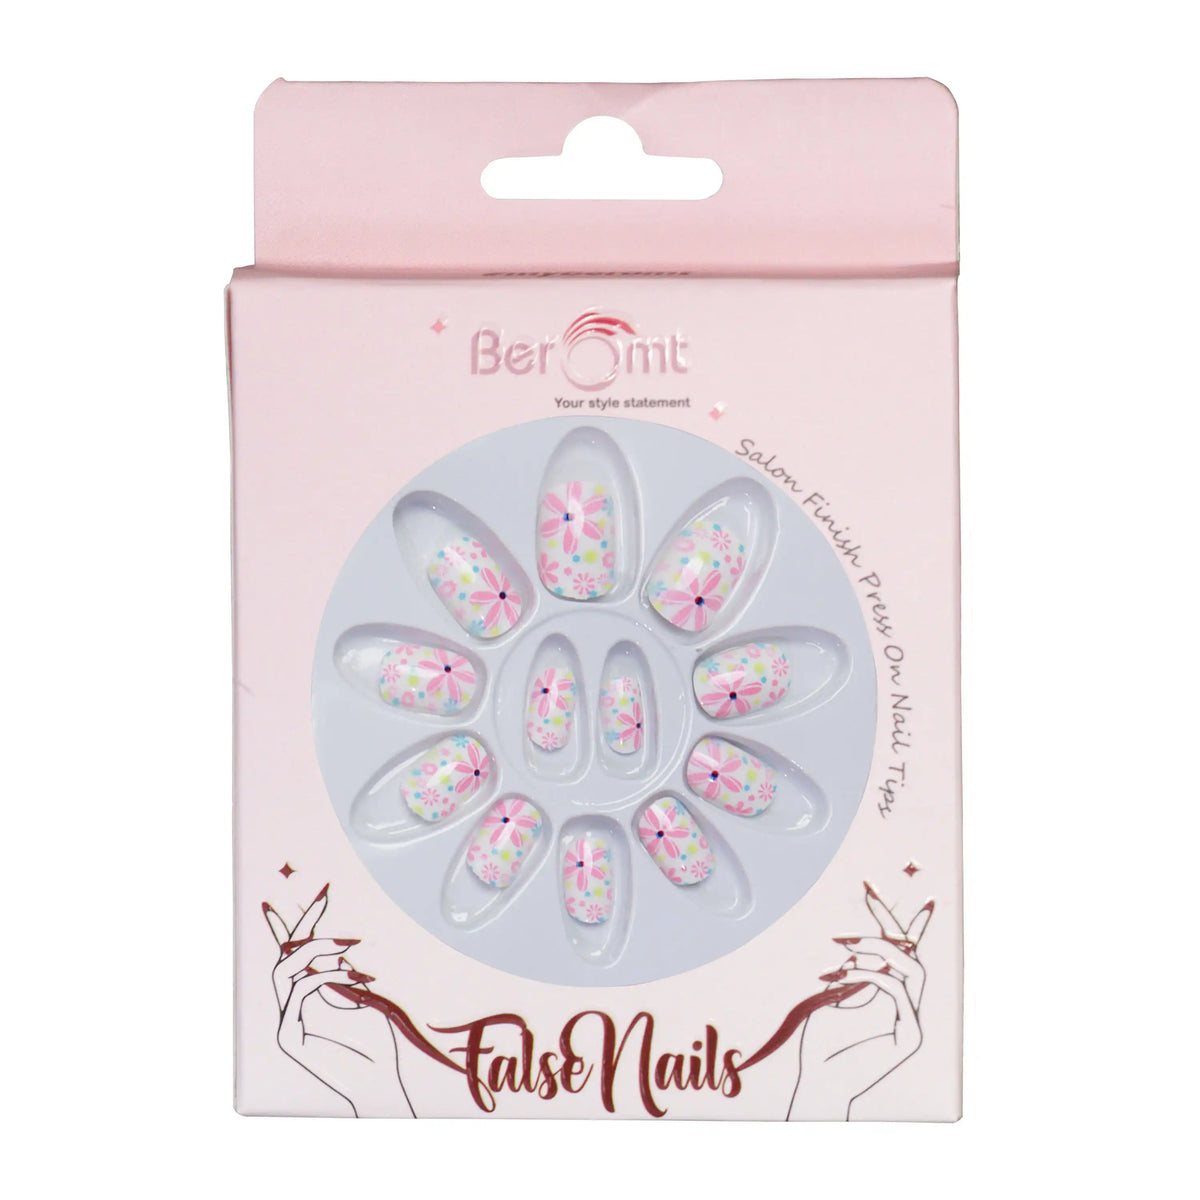 KIDS NAILS - 25 (NAIL KIT INCLUDED)